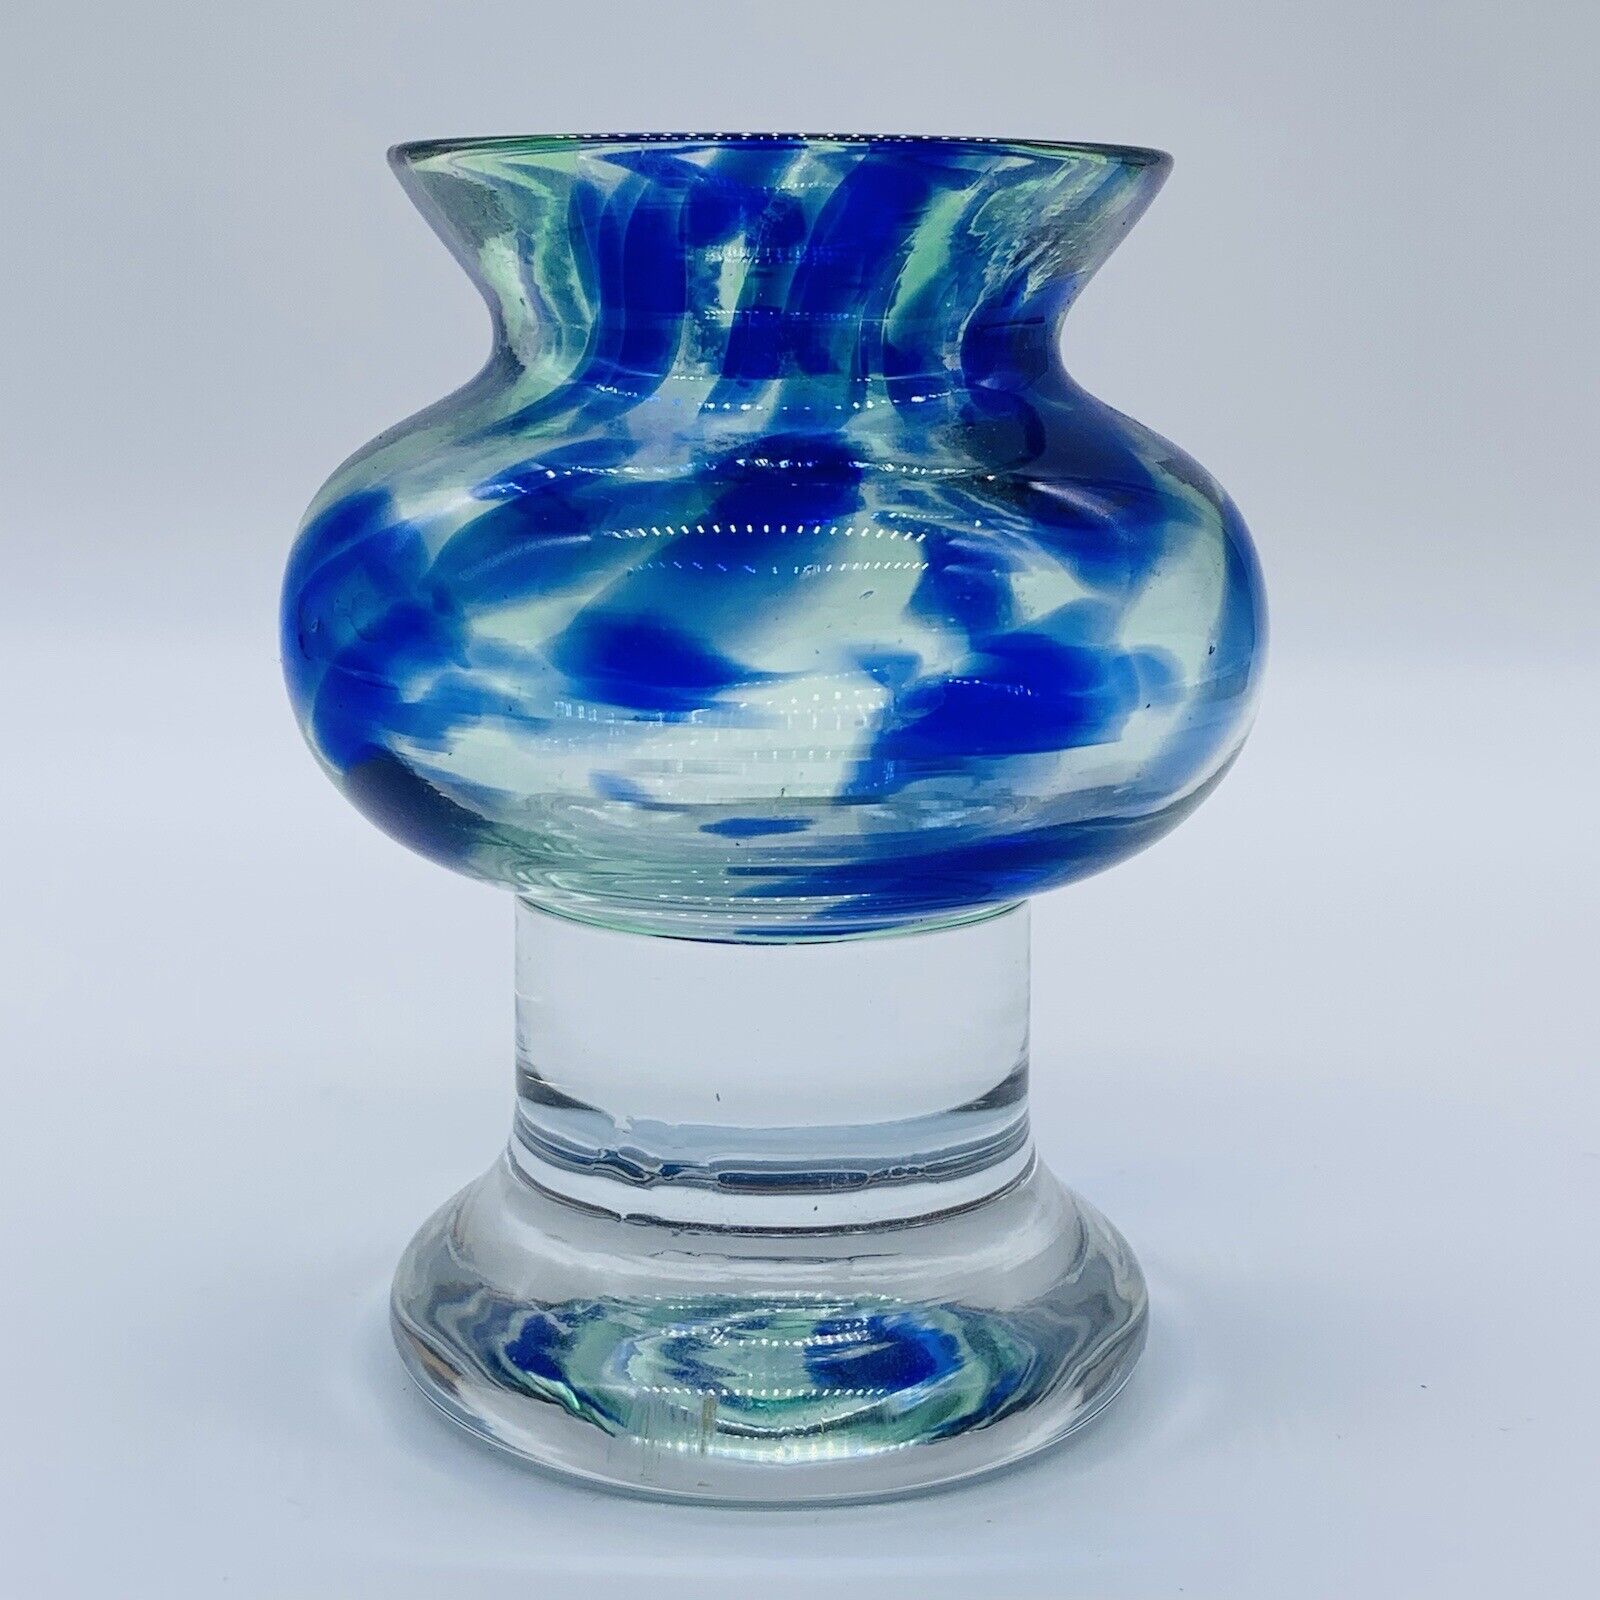 Sea Of Sweden Bjorn Ramel Blue Green Art Glass Heavy Footed Candle Holder 4.5”